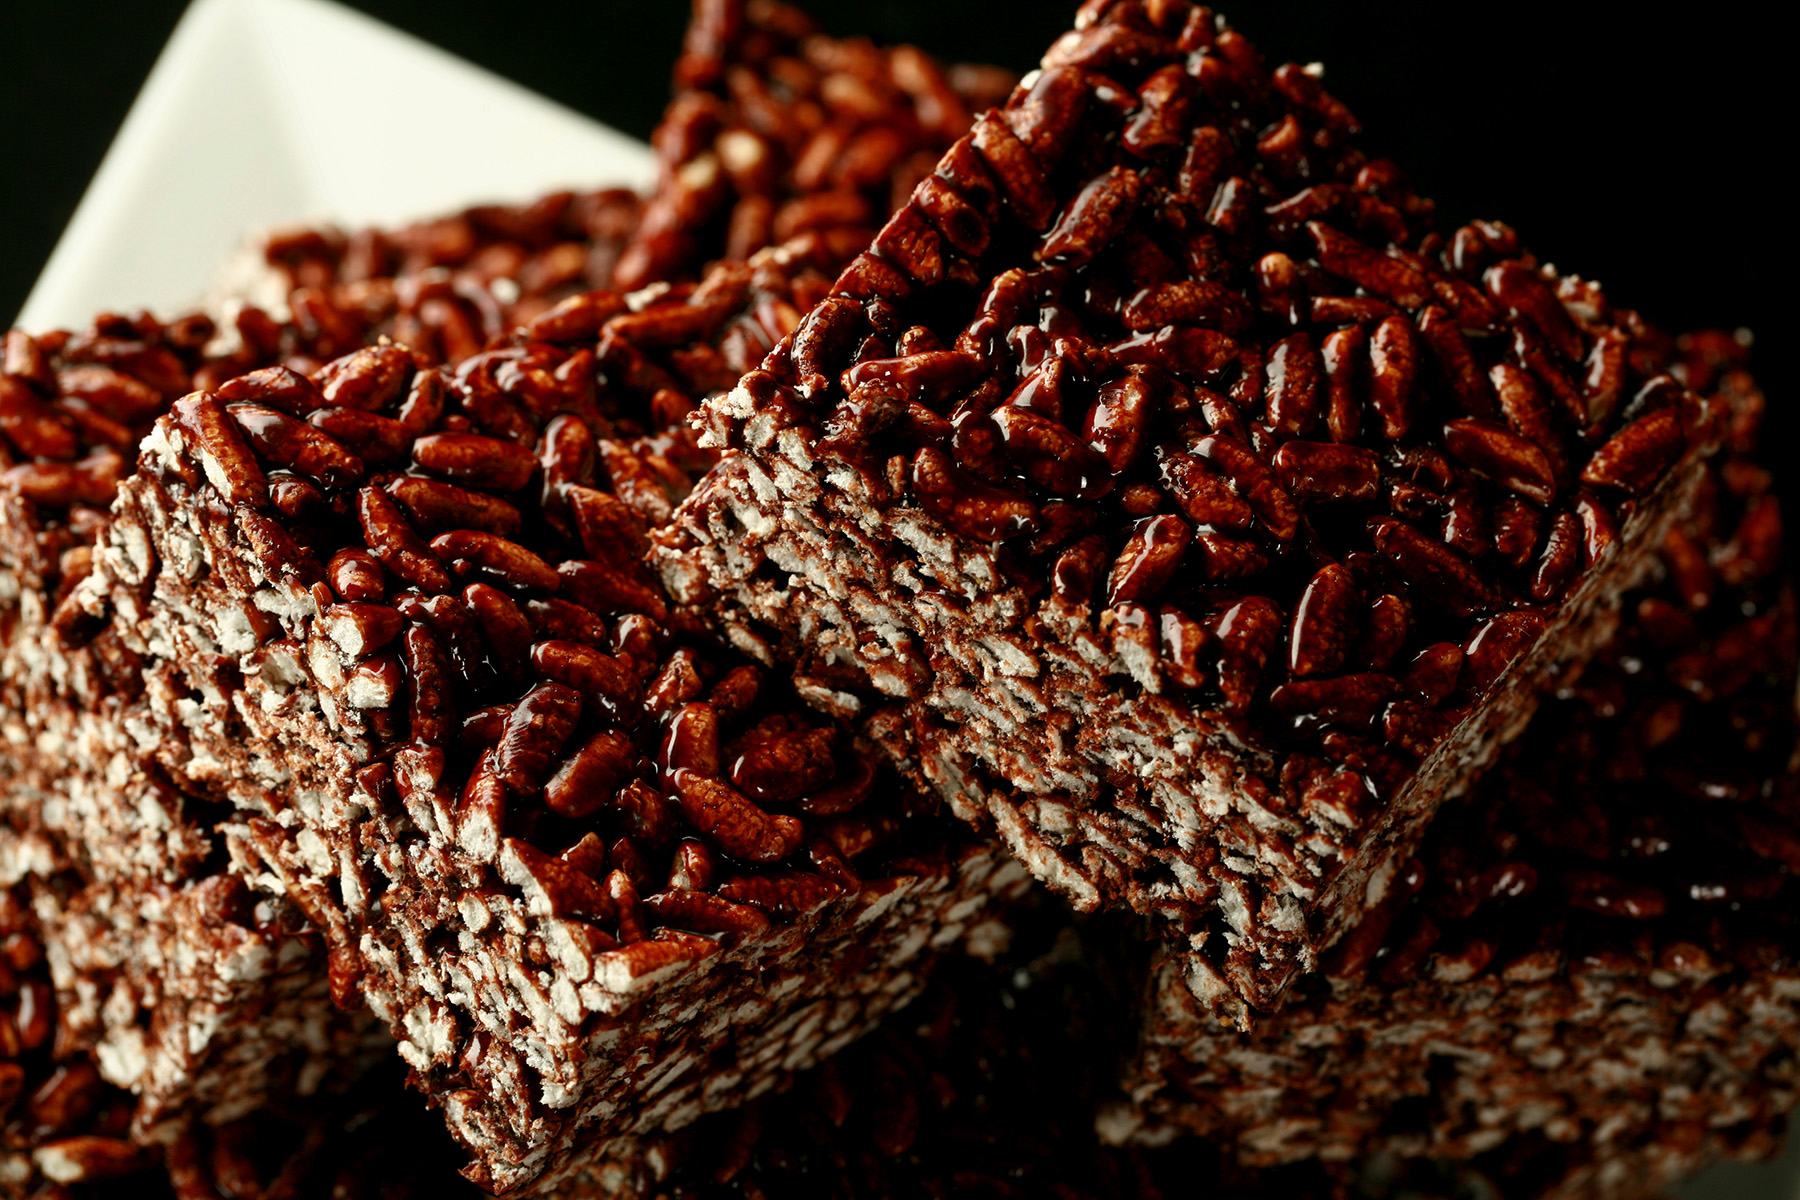 A close up view of large squares of puffed rice bars.